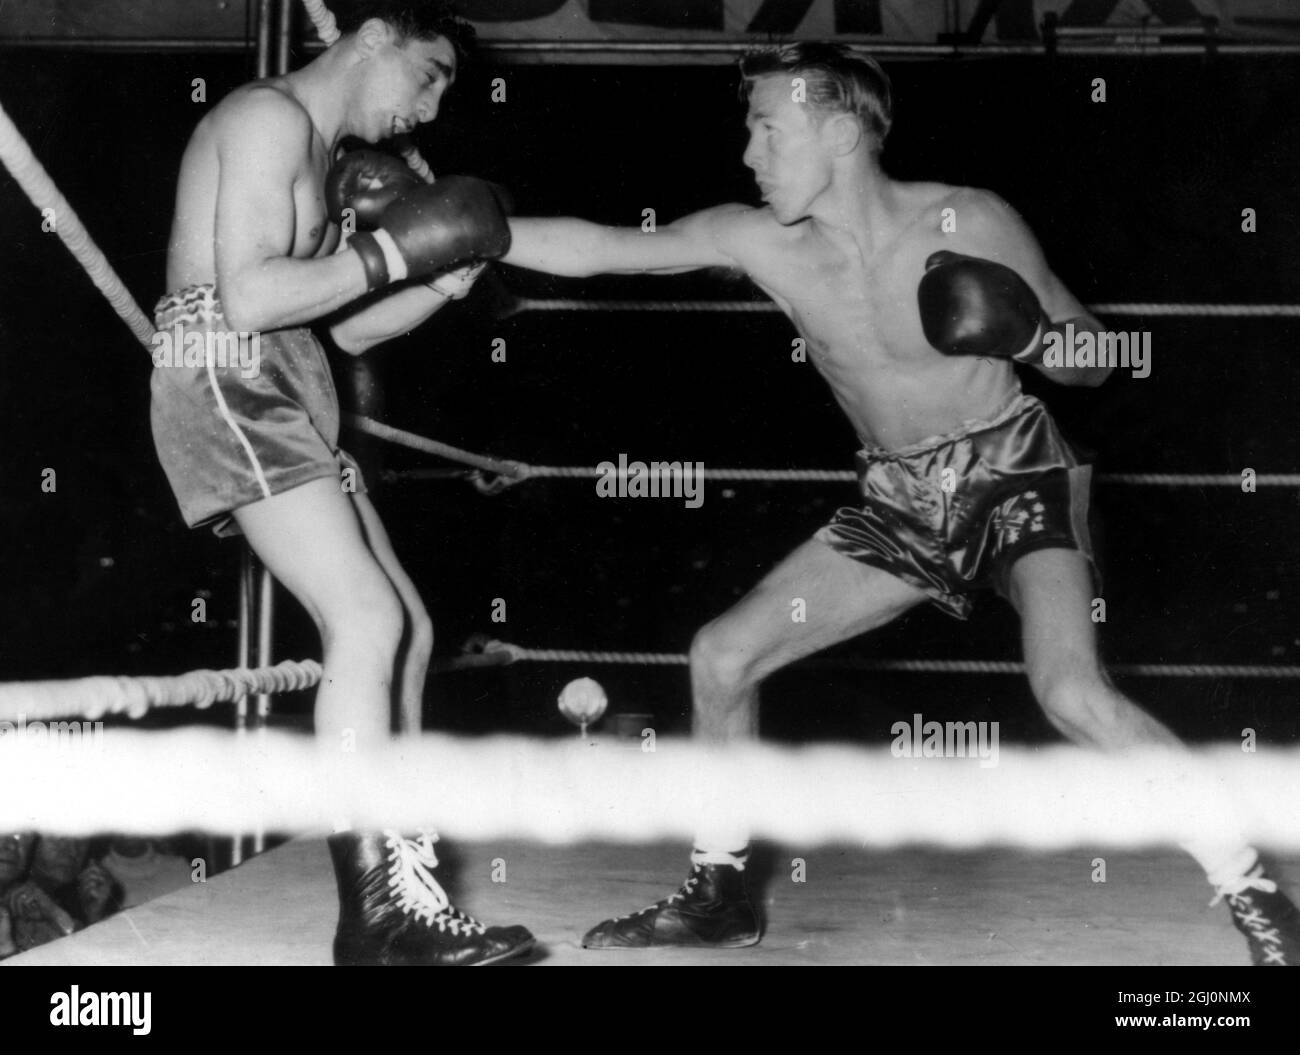 Jimmy Carruthers of Australia knocks Vic Toween to a standstill in the first round of their world bantam weight championship fight here in Johannesburg , South Africa . Prior to the knock-out , shortlty after two minutres of fighting , Carruthers knocked the South African out of the ring twice. 18th November 1952 Stock Photo